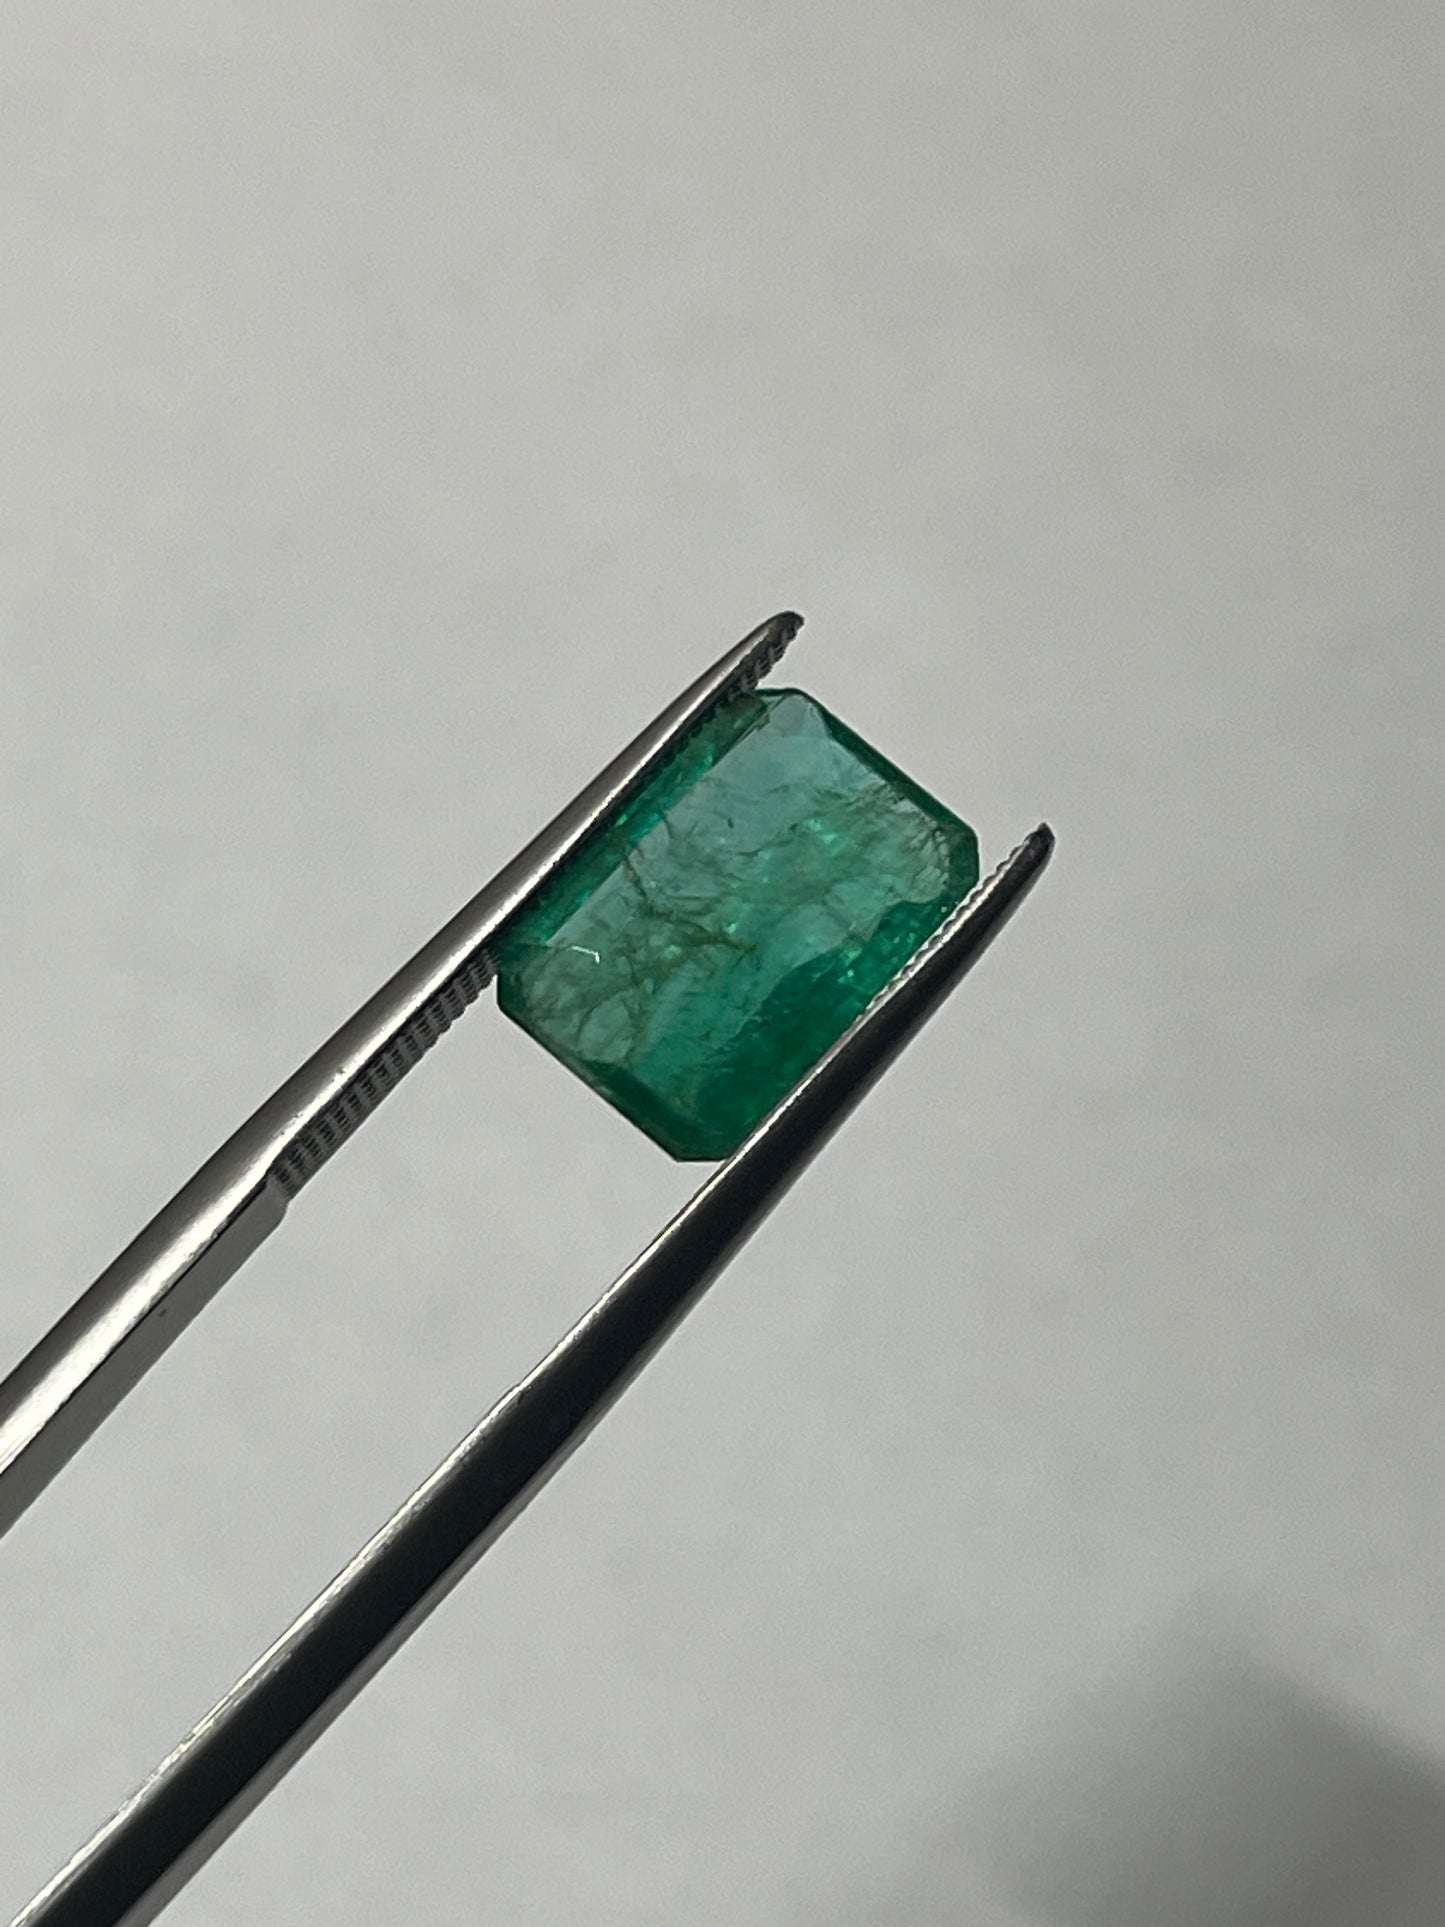 3.41ct Emerald with Moderate Oil, Zambia